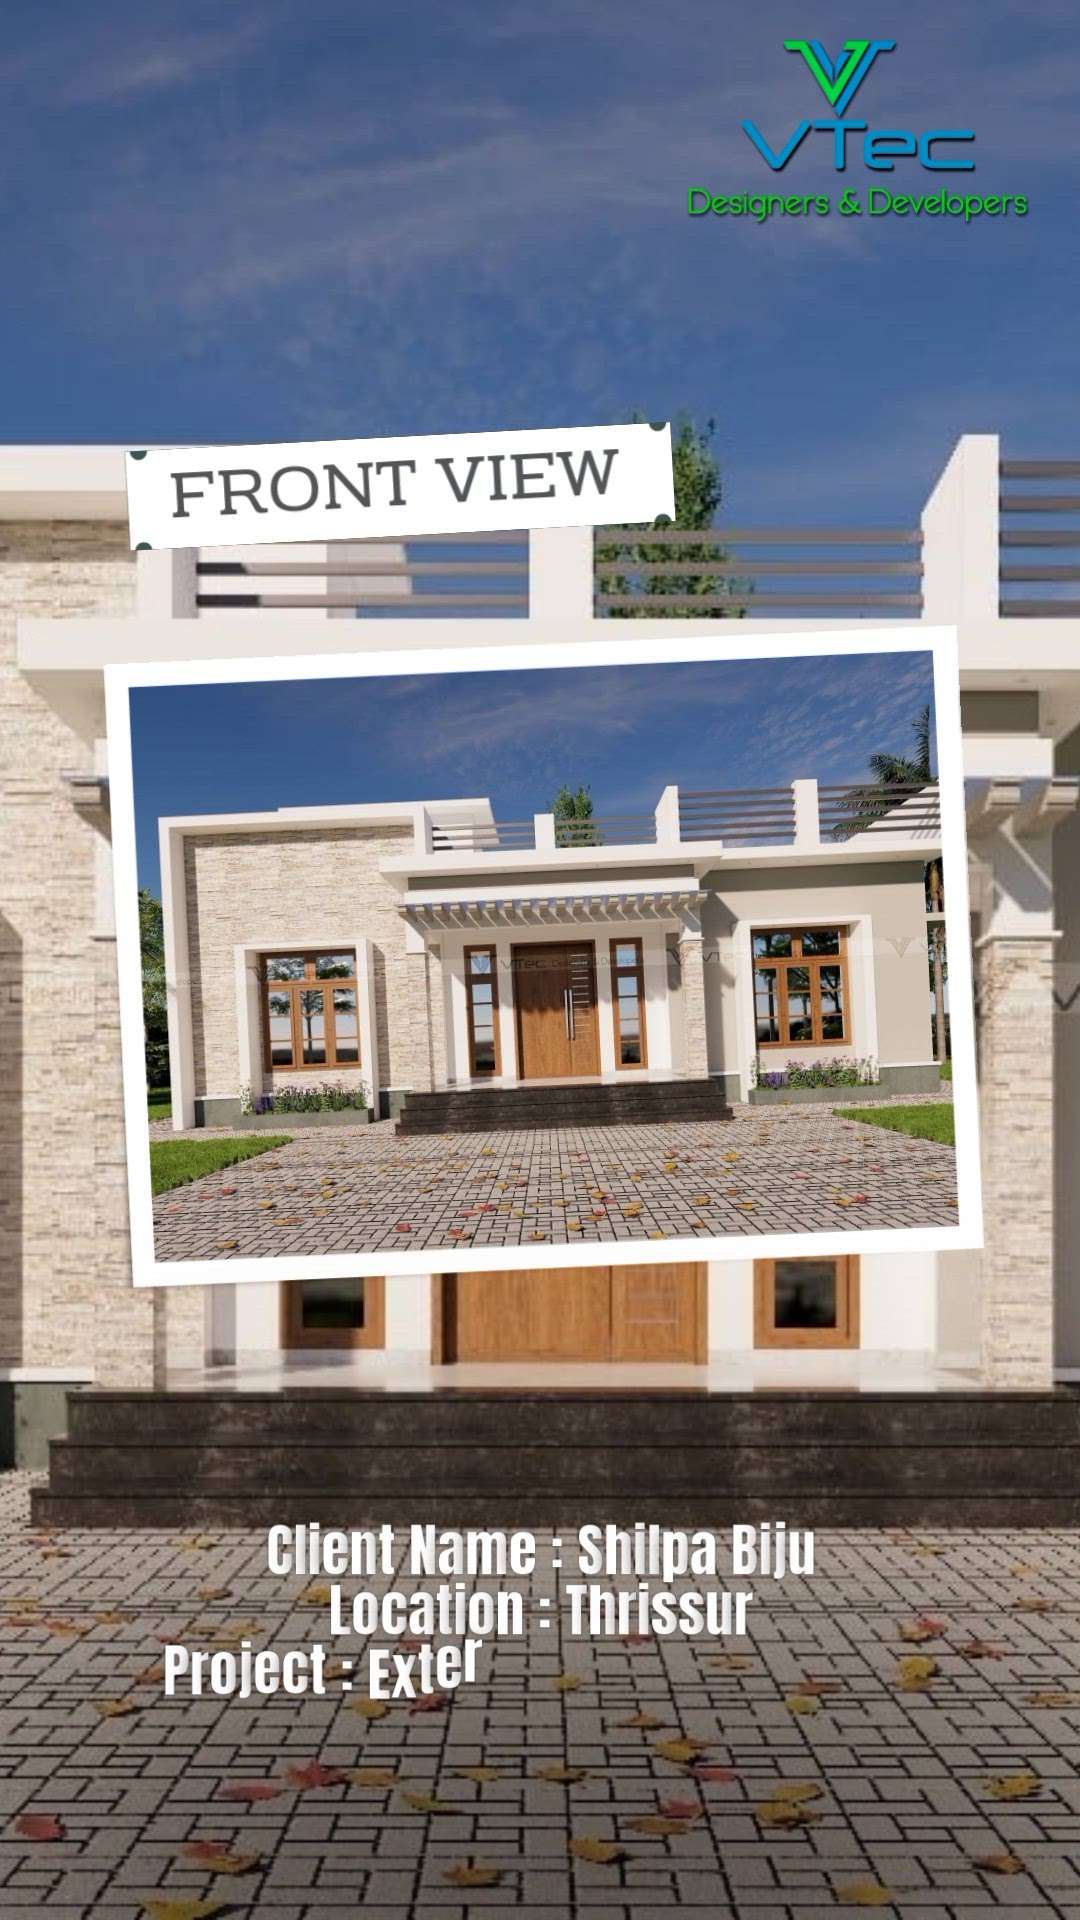 Preview Your Perfect Home!

Our 3D visualization provides a detailed, realistic view of your home’s exterior. Explore every angle and feature with stunning clarity. From roof to landscape, see your vision come to life with VTec Designers & Developers. Experience unparalleled design excellence before it's built.

Client Name : Shilpa Biju
Location: Thrissur
Project: Exterior 3D Visualization



#3DDesignExcellence #interiordesigningservices #interiordesignersinkerala #interiordesign #interiors #interiordesignersinnagercoil #homeinteriordesigner #interiordesigner #3Drendering #designer #interiordesignersinkollam #interiordesignersintrivandrum #enscape #3dsmax #sketchup #3Dvisualization #realtime # keralahomedesign #renovation #Renovationservices #RenovationExperts #homerenovationservices #builders #walkthrough